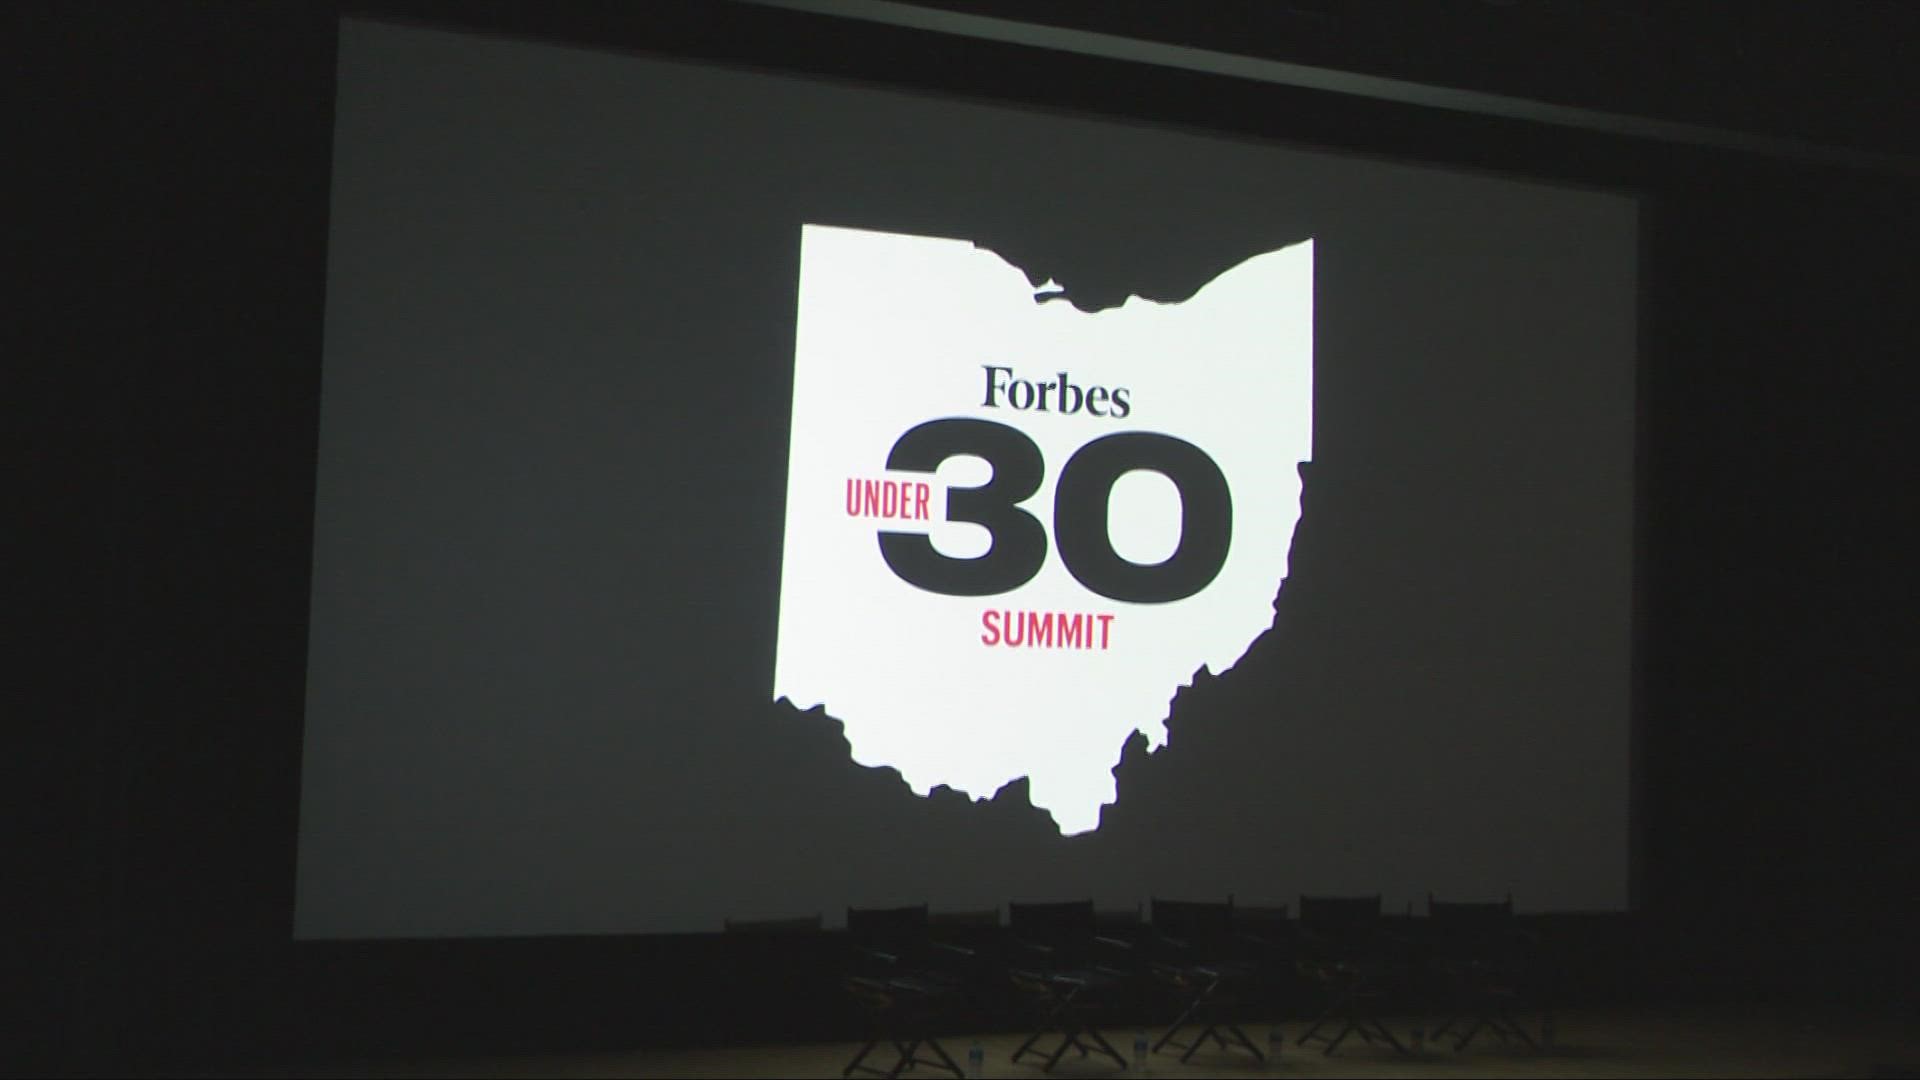 'Our goal with the next Under 30 Summit is to help spotlight Ohio’s talented workforce and ample opportunities for entrepreneurs and investors.'